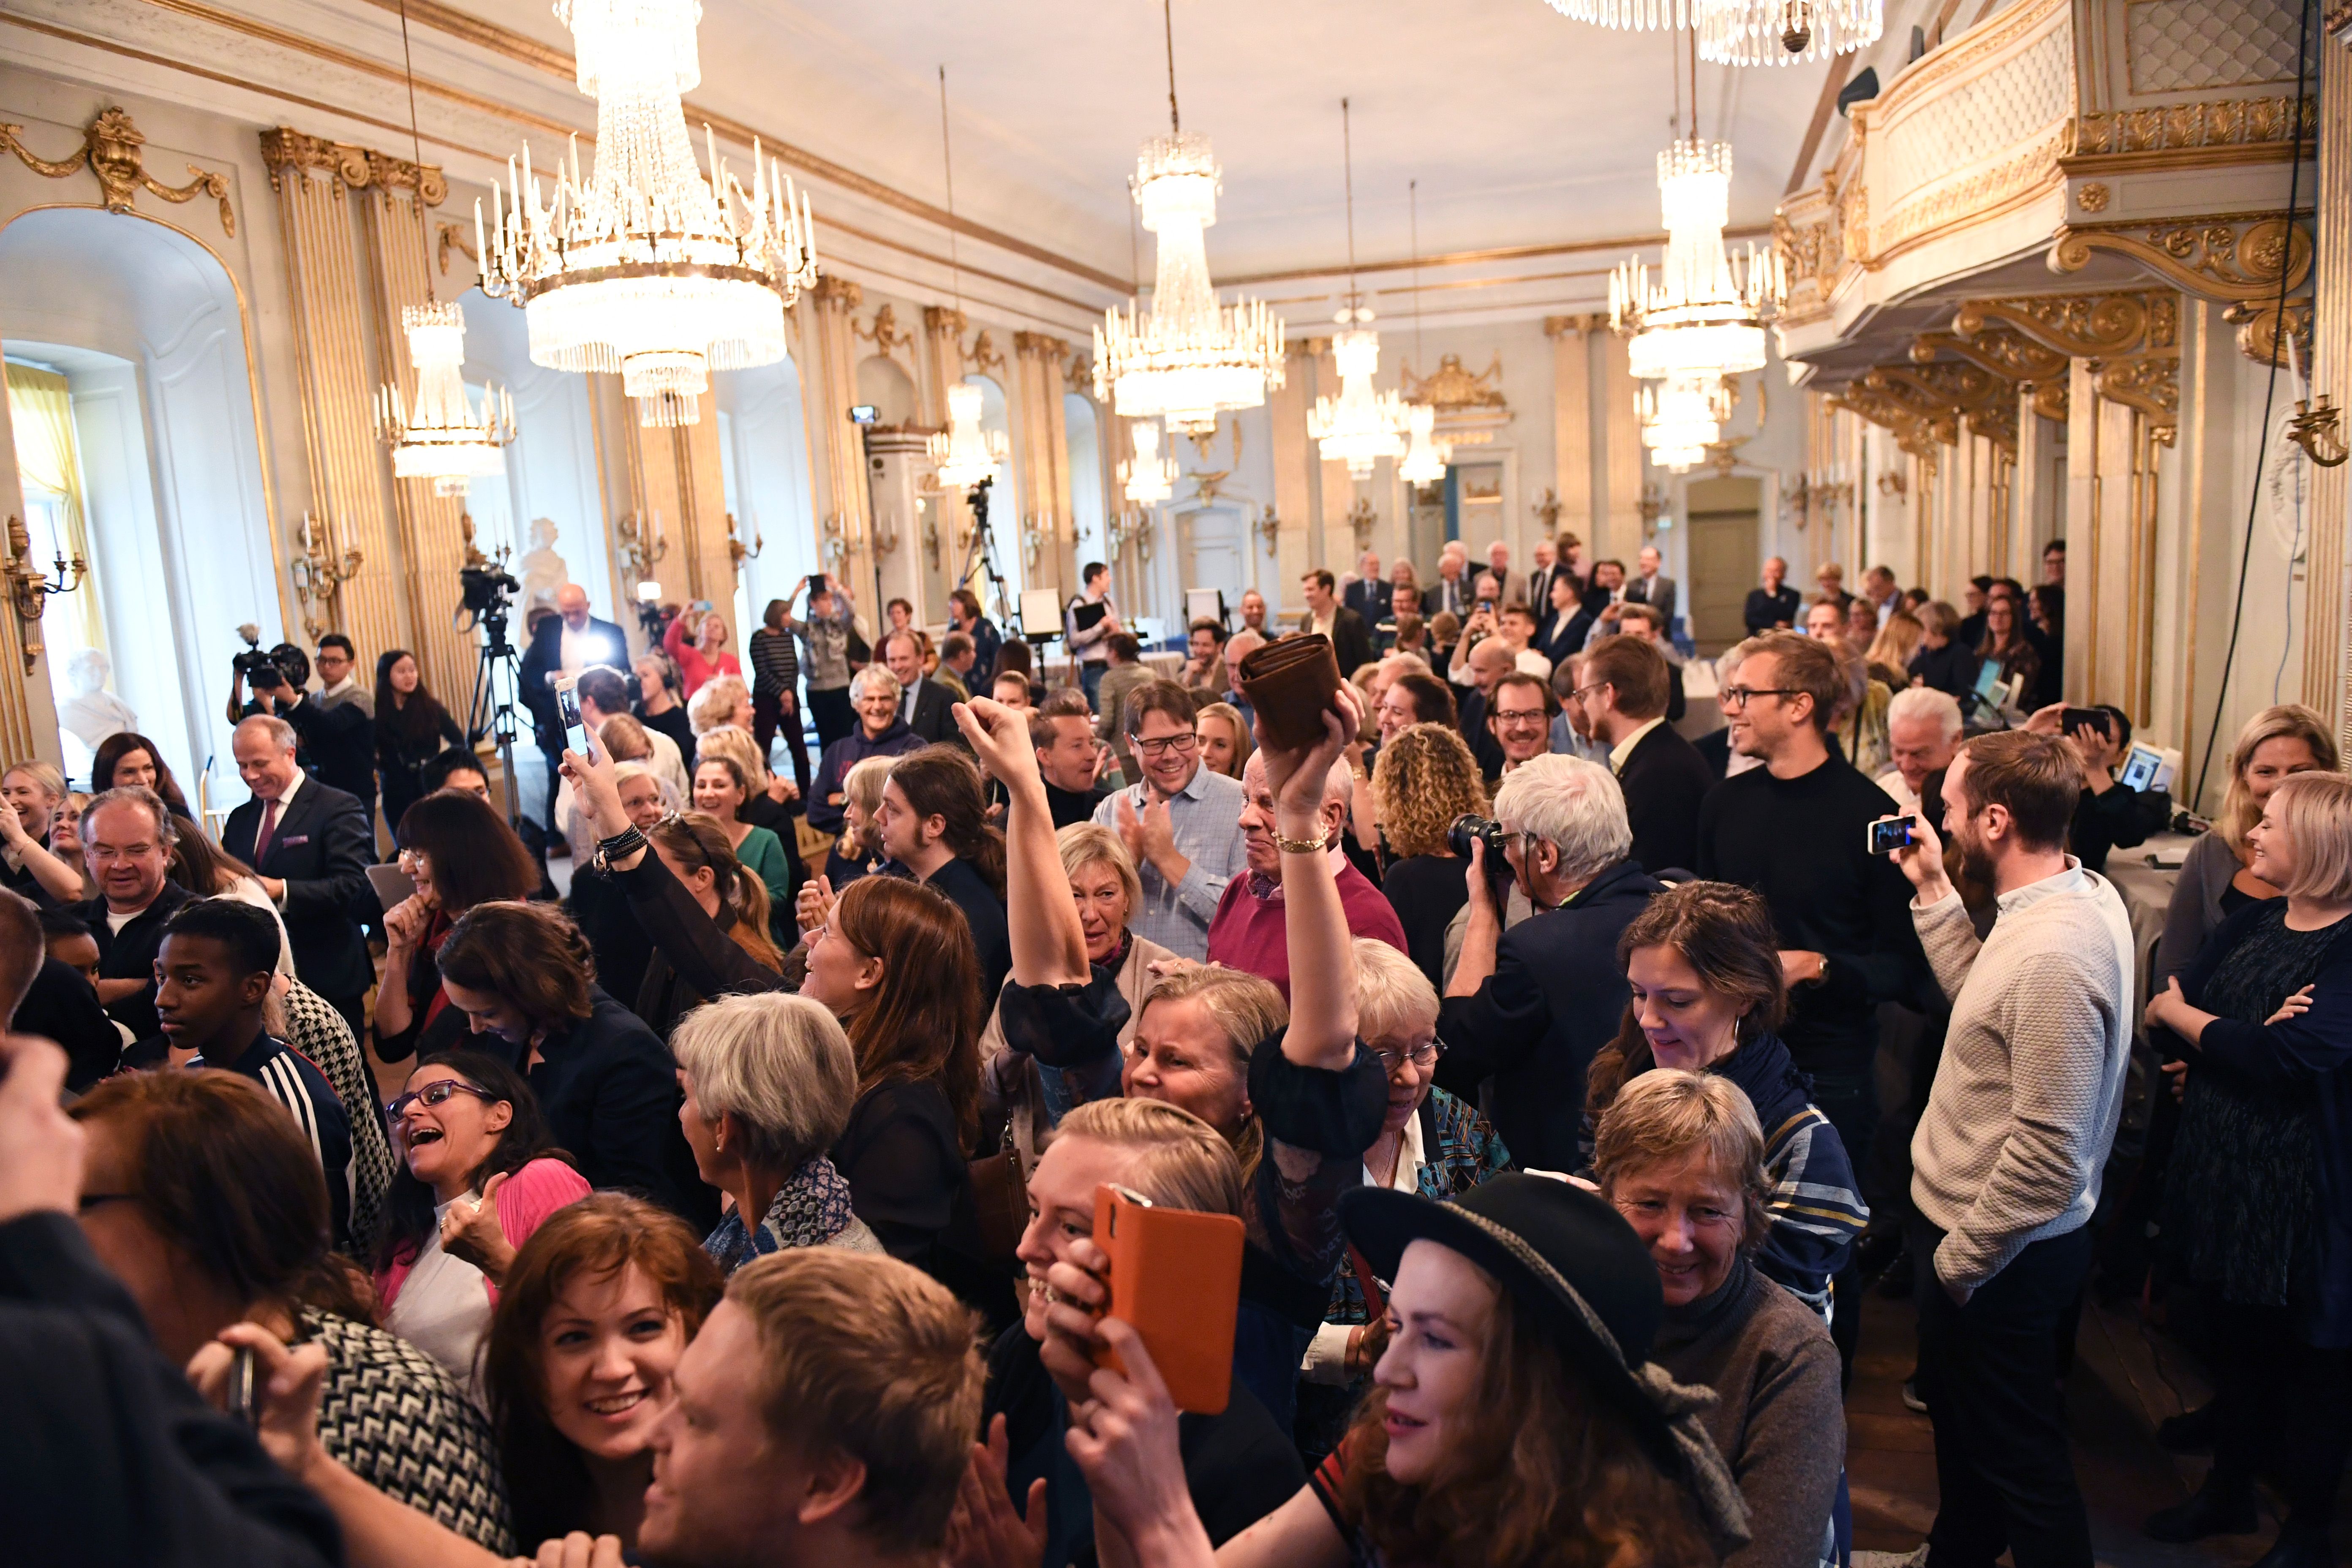 The audience reacts as Permanent Secretary of the Swedish Academy Sara Danius announces that Bob Dylan is awarded the 2016 Nobel Prize in Literature during a presser at the Old Stockholm Stock Exchange Building in Stockholm, on October 13, 2016.